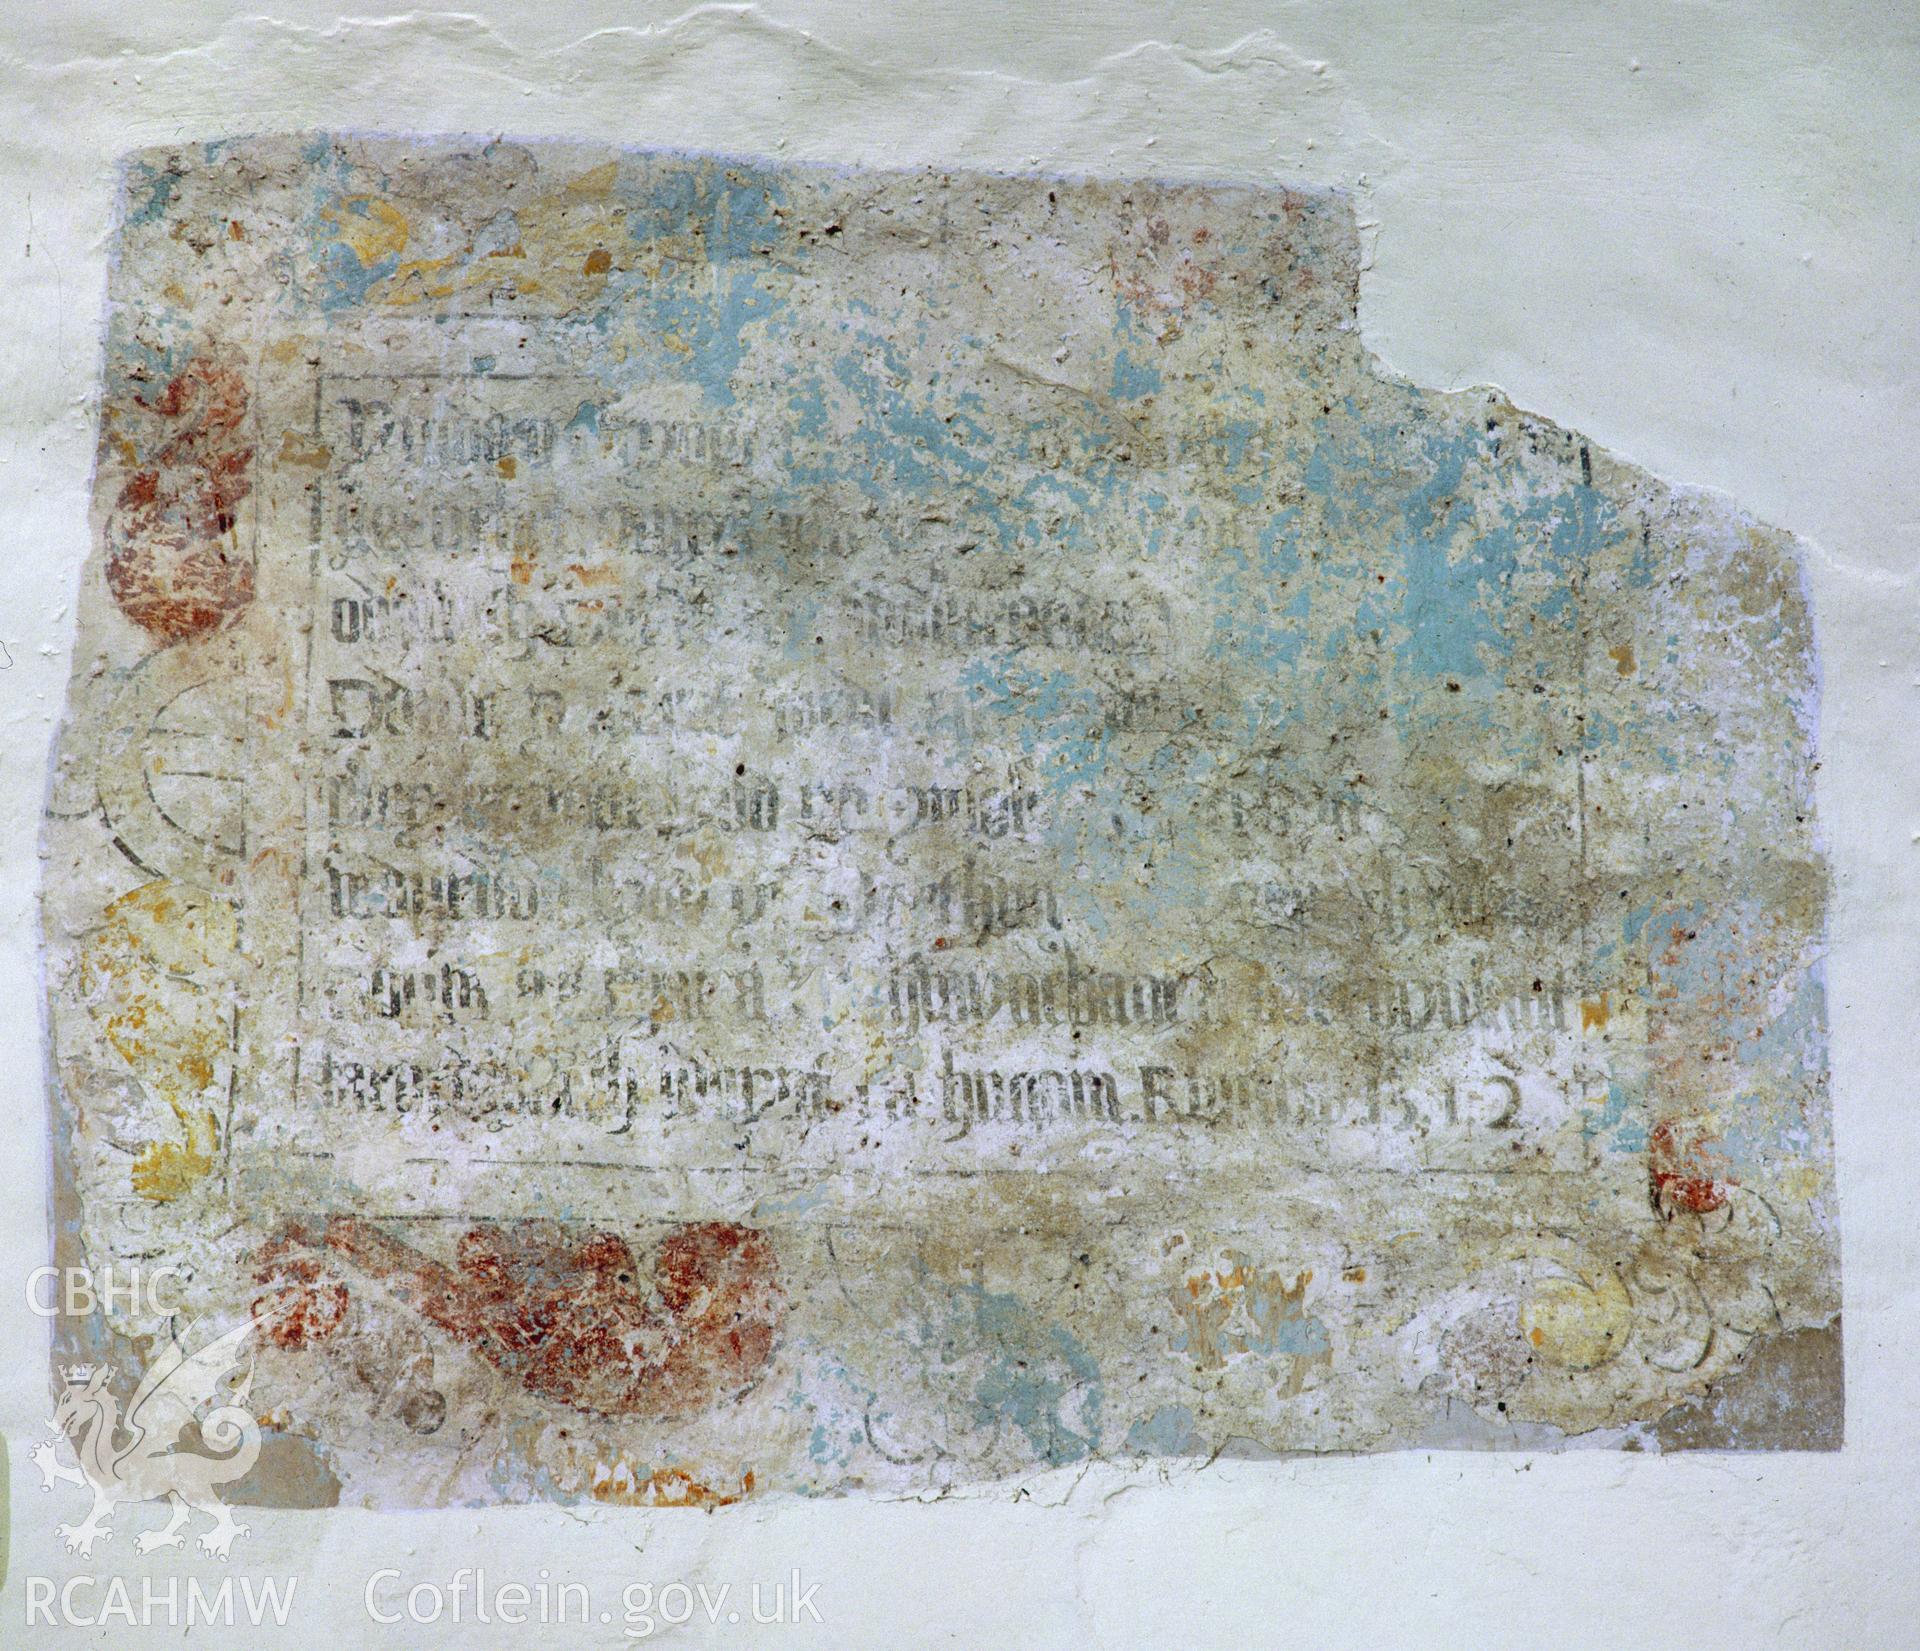 RCAHMW colour transparency of the wallpainting in St Marys Church, Rhuddlan, taken by Iain Wright.